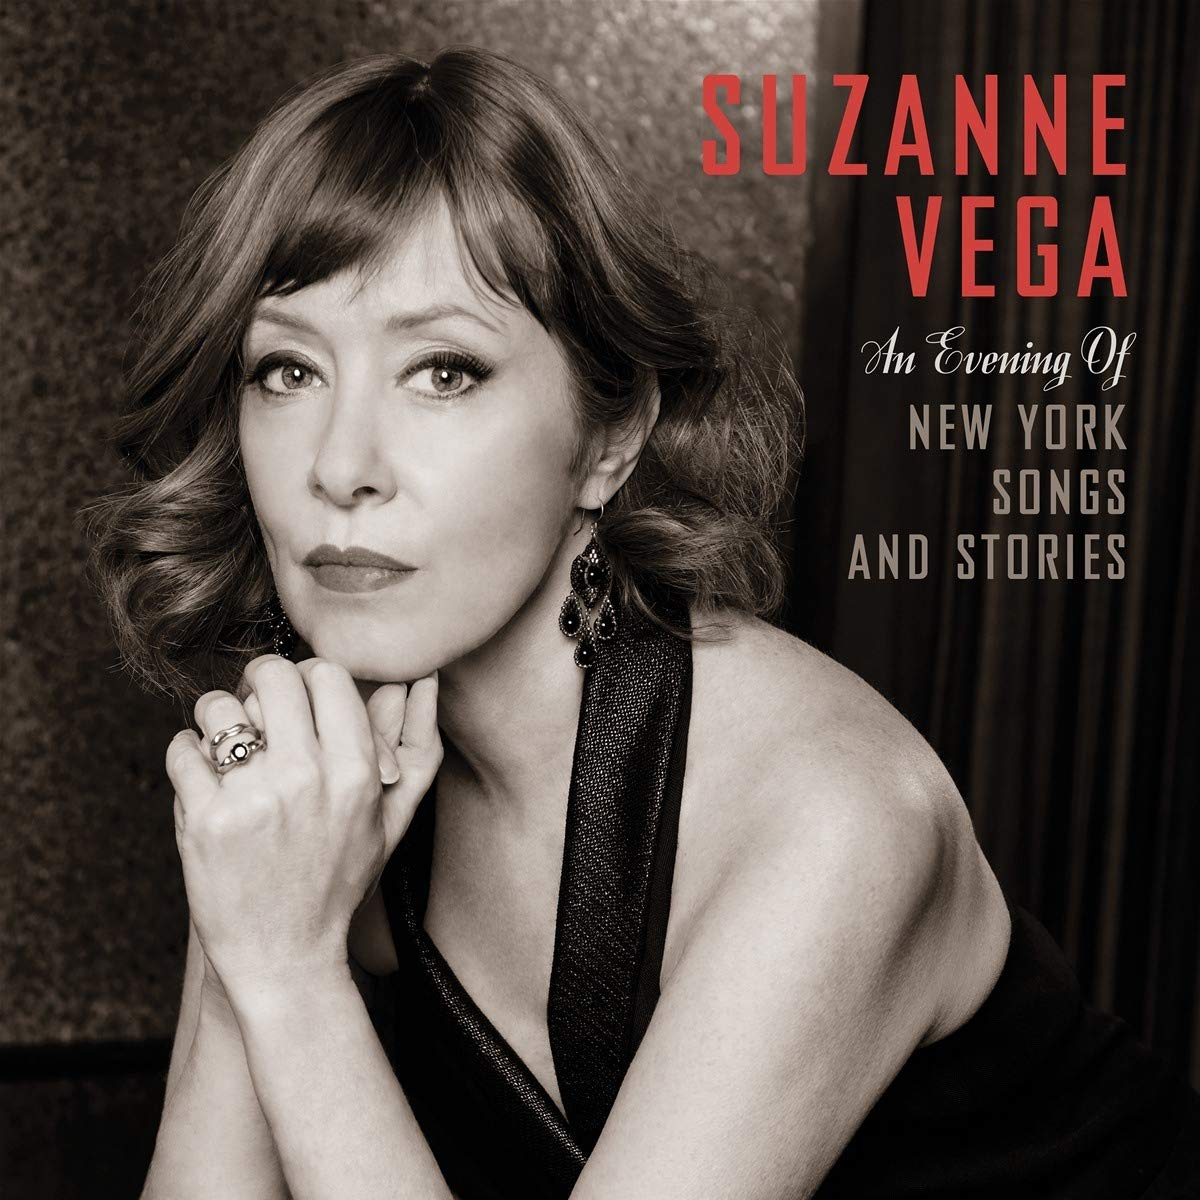 Suzanne Vega's "An Evening of New York Songs and Stories" album cover